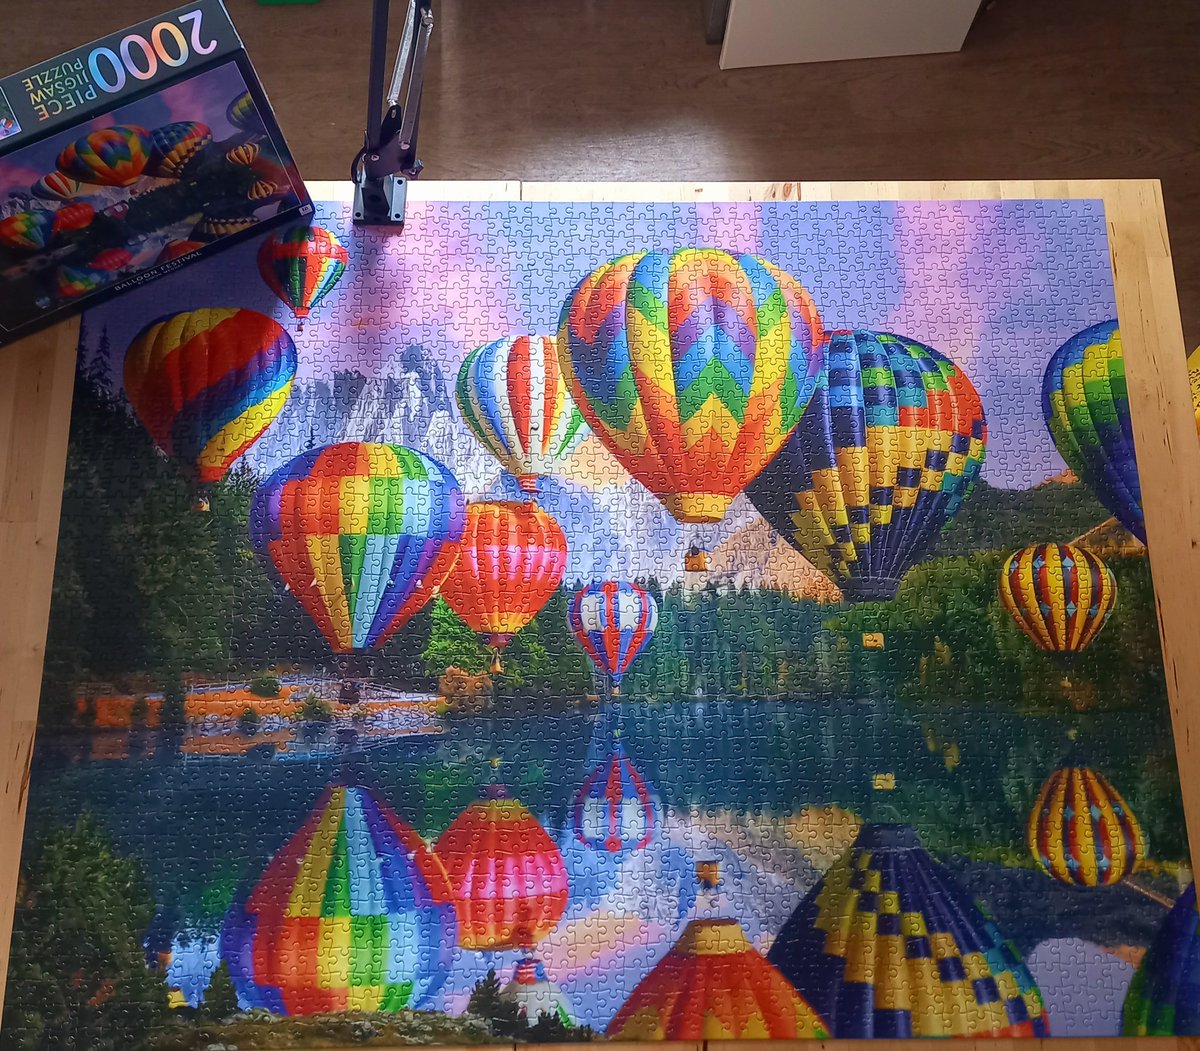 On my Easter break from delivering my Positive Voice #HIV talks to schools so kept myself busy with this 2,000 piece jigsaw puzzle. 'Balloon Festival' by Simon Mendez. Bought second-hand from the gift shop @Painshill: I'll donate back for someone else to enjoy.